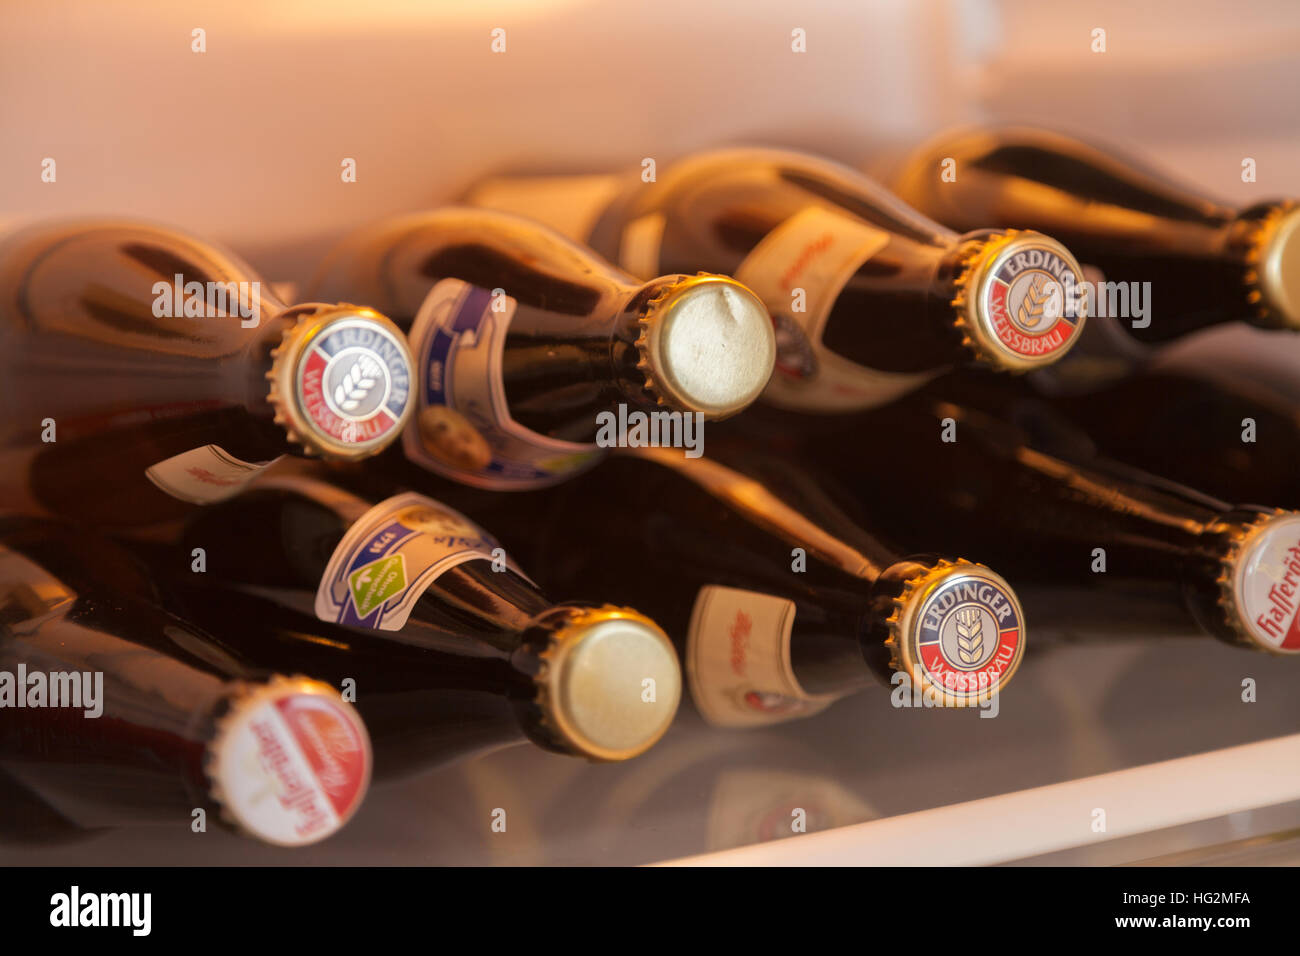 BURG / GERMANY - JANUARY 2, 2017: diverse beer bottles lies in a fridge Stock Photo